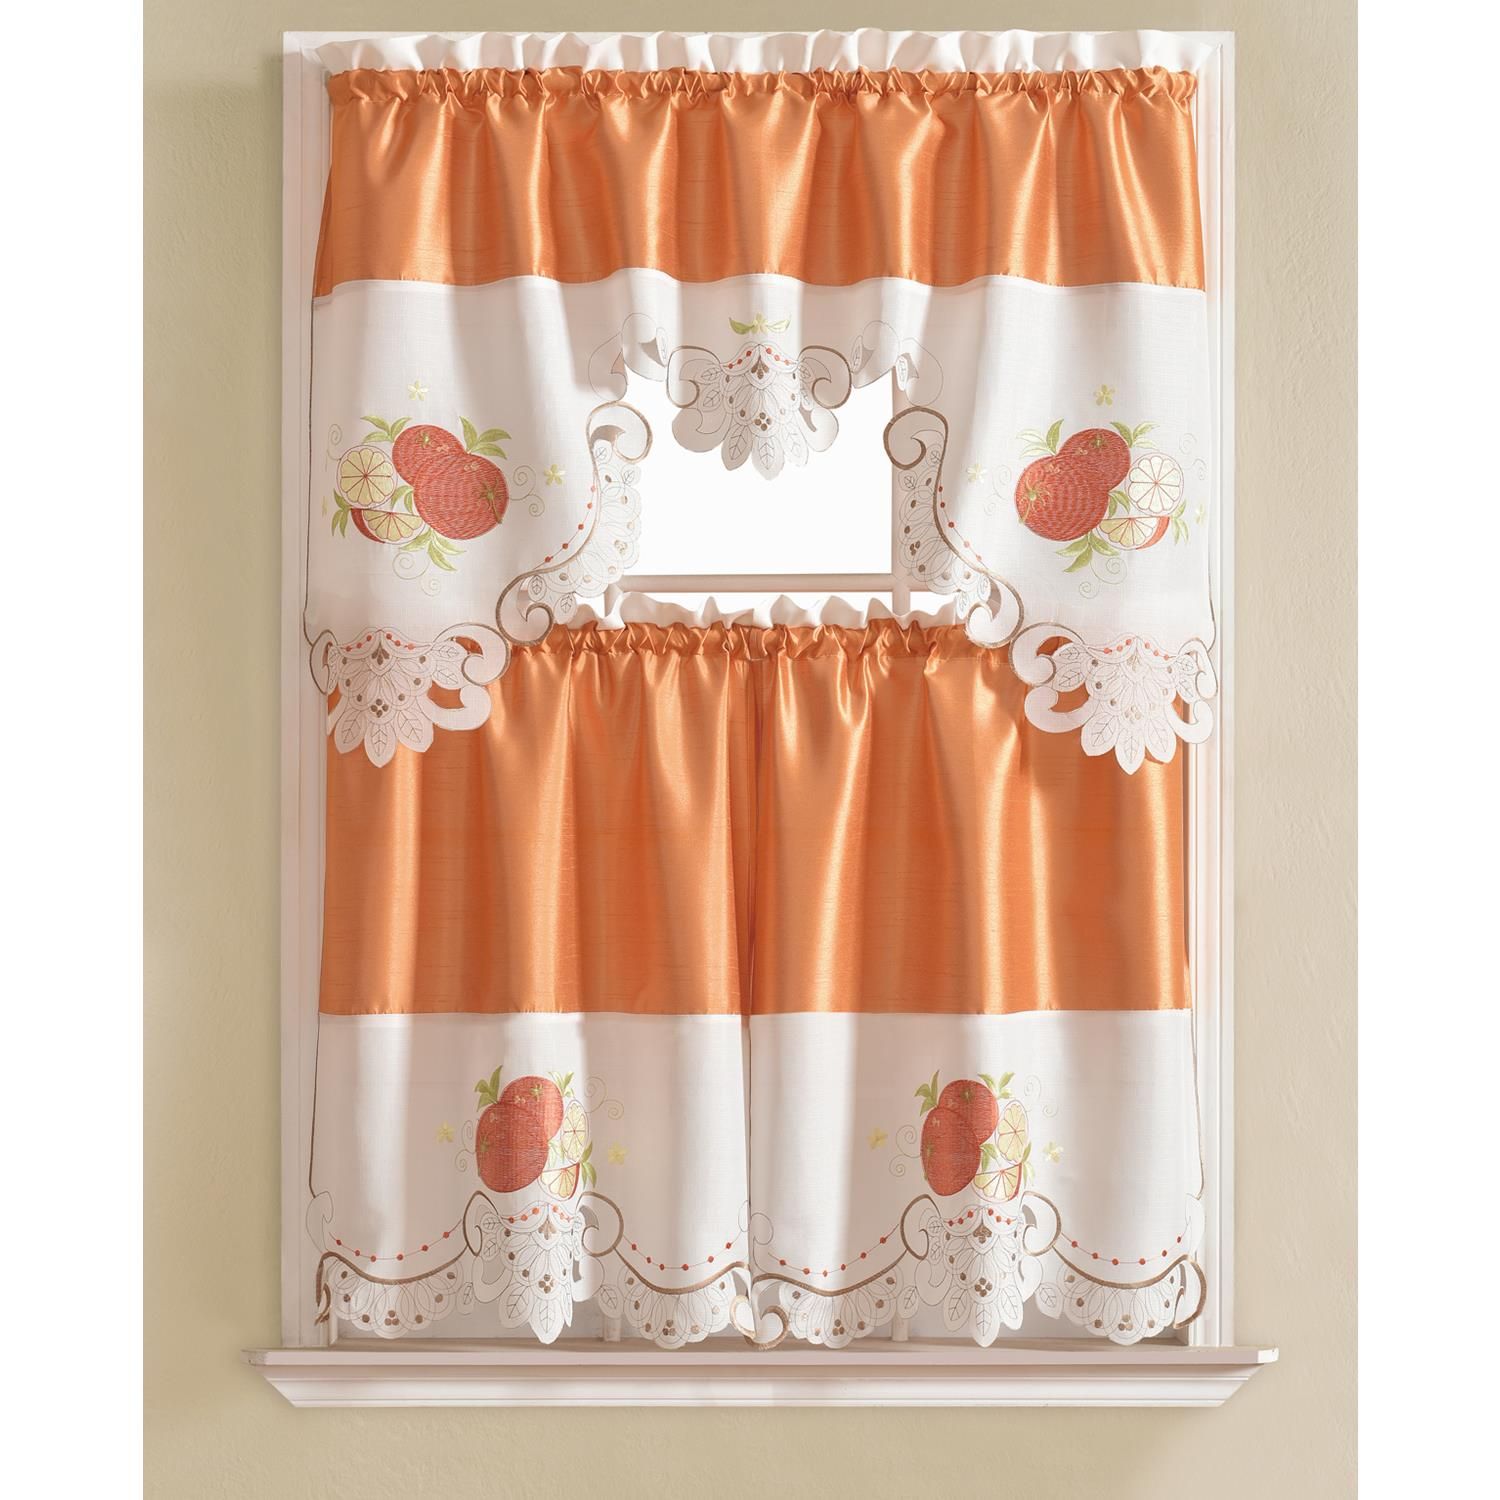 Details About Noble Embroidered Orange Tier And Valance Kitchen Curtain Set Throughout Urban Embroidered Tier And Valance Kitchen Curtain Tier Sets (Photo 4 of 20)